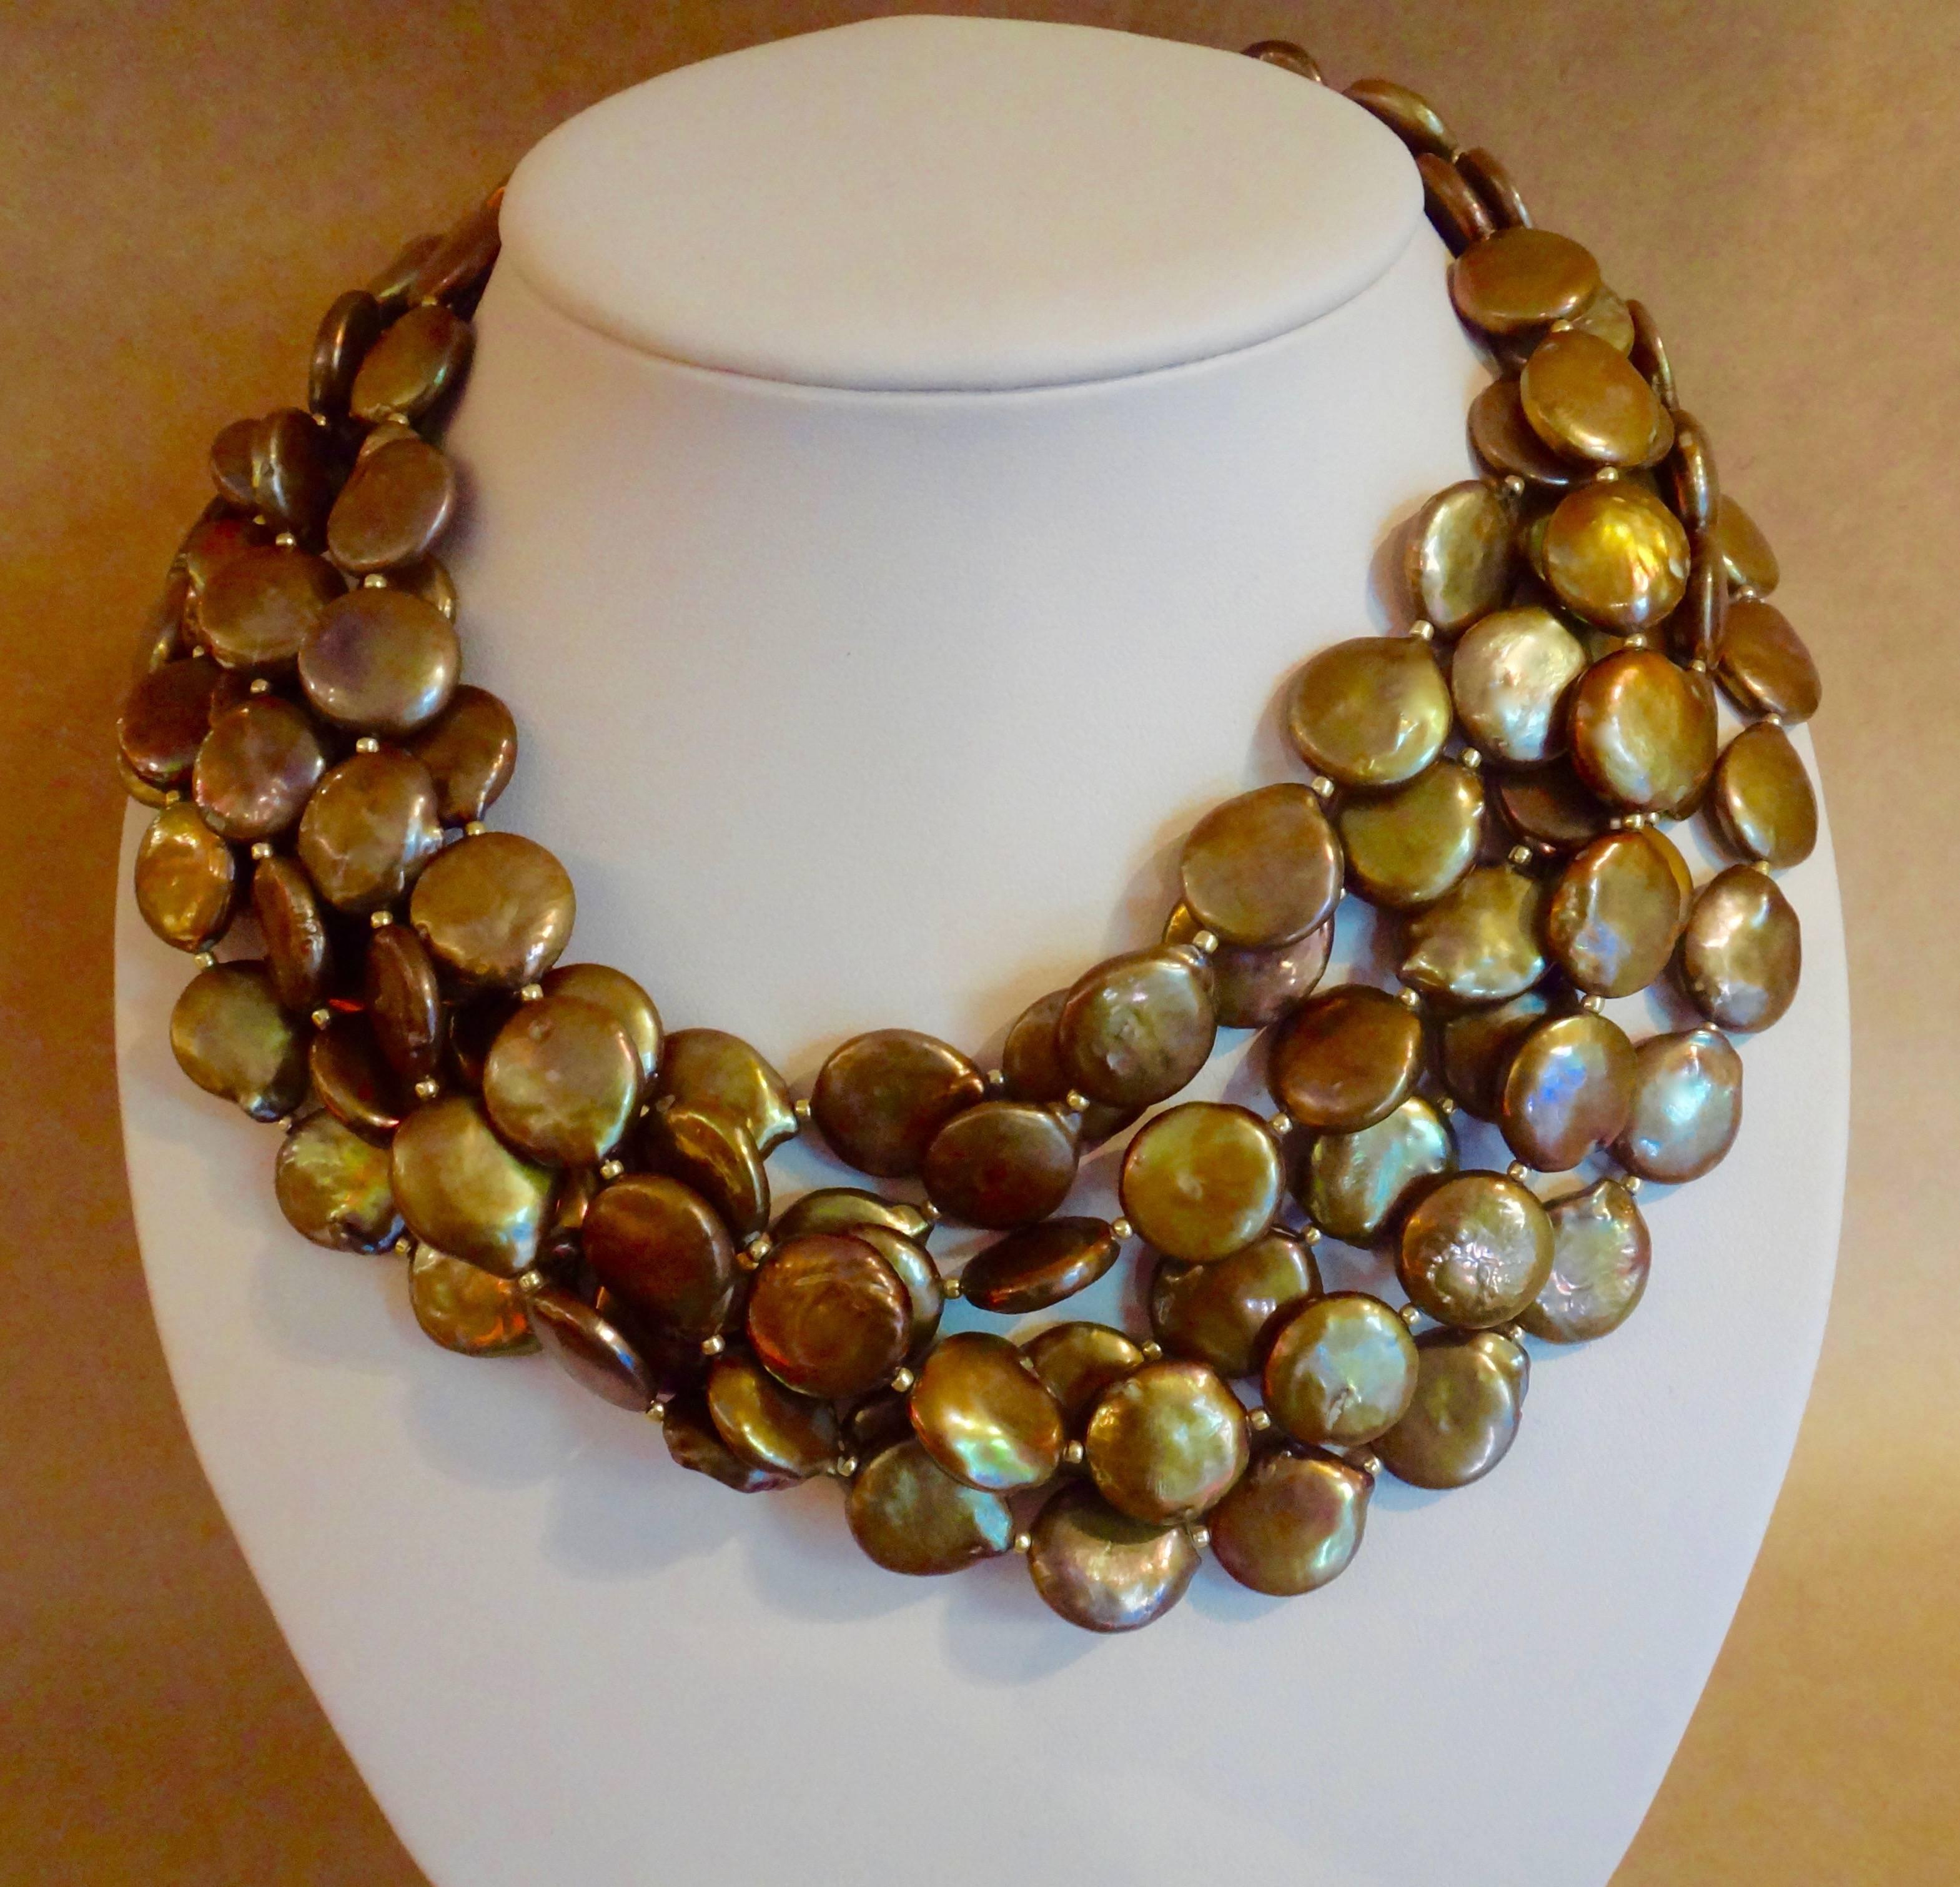 Six strands of richly colored bronze pearls comprise this torsade style necklace.  The pearls are spaced with tiny gold beads and the necklace is finished with a hammered vermeil hook and eye clasp.  The necklace is 18 inches long but may be